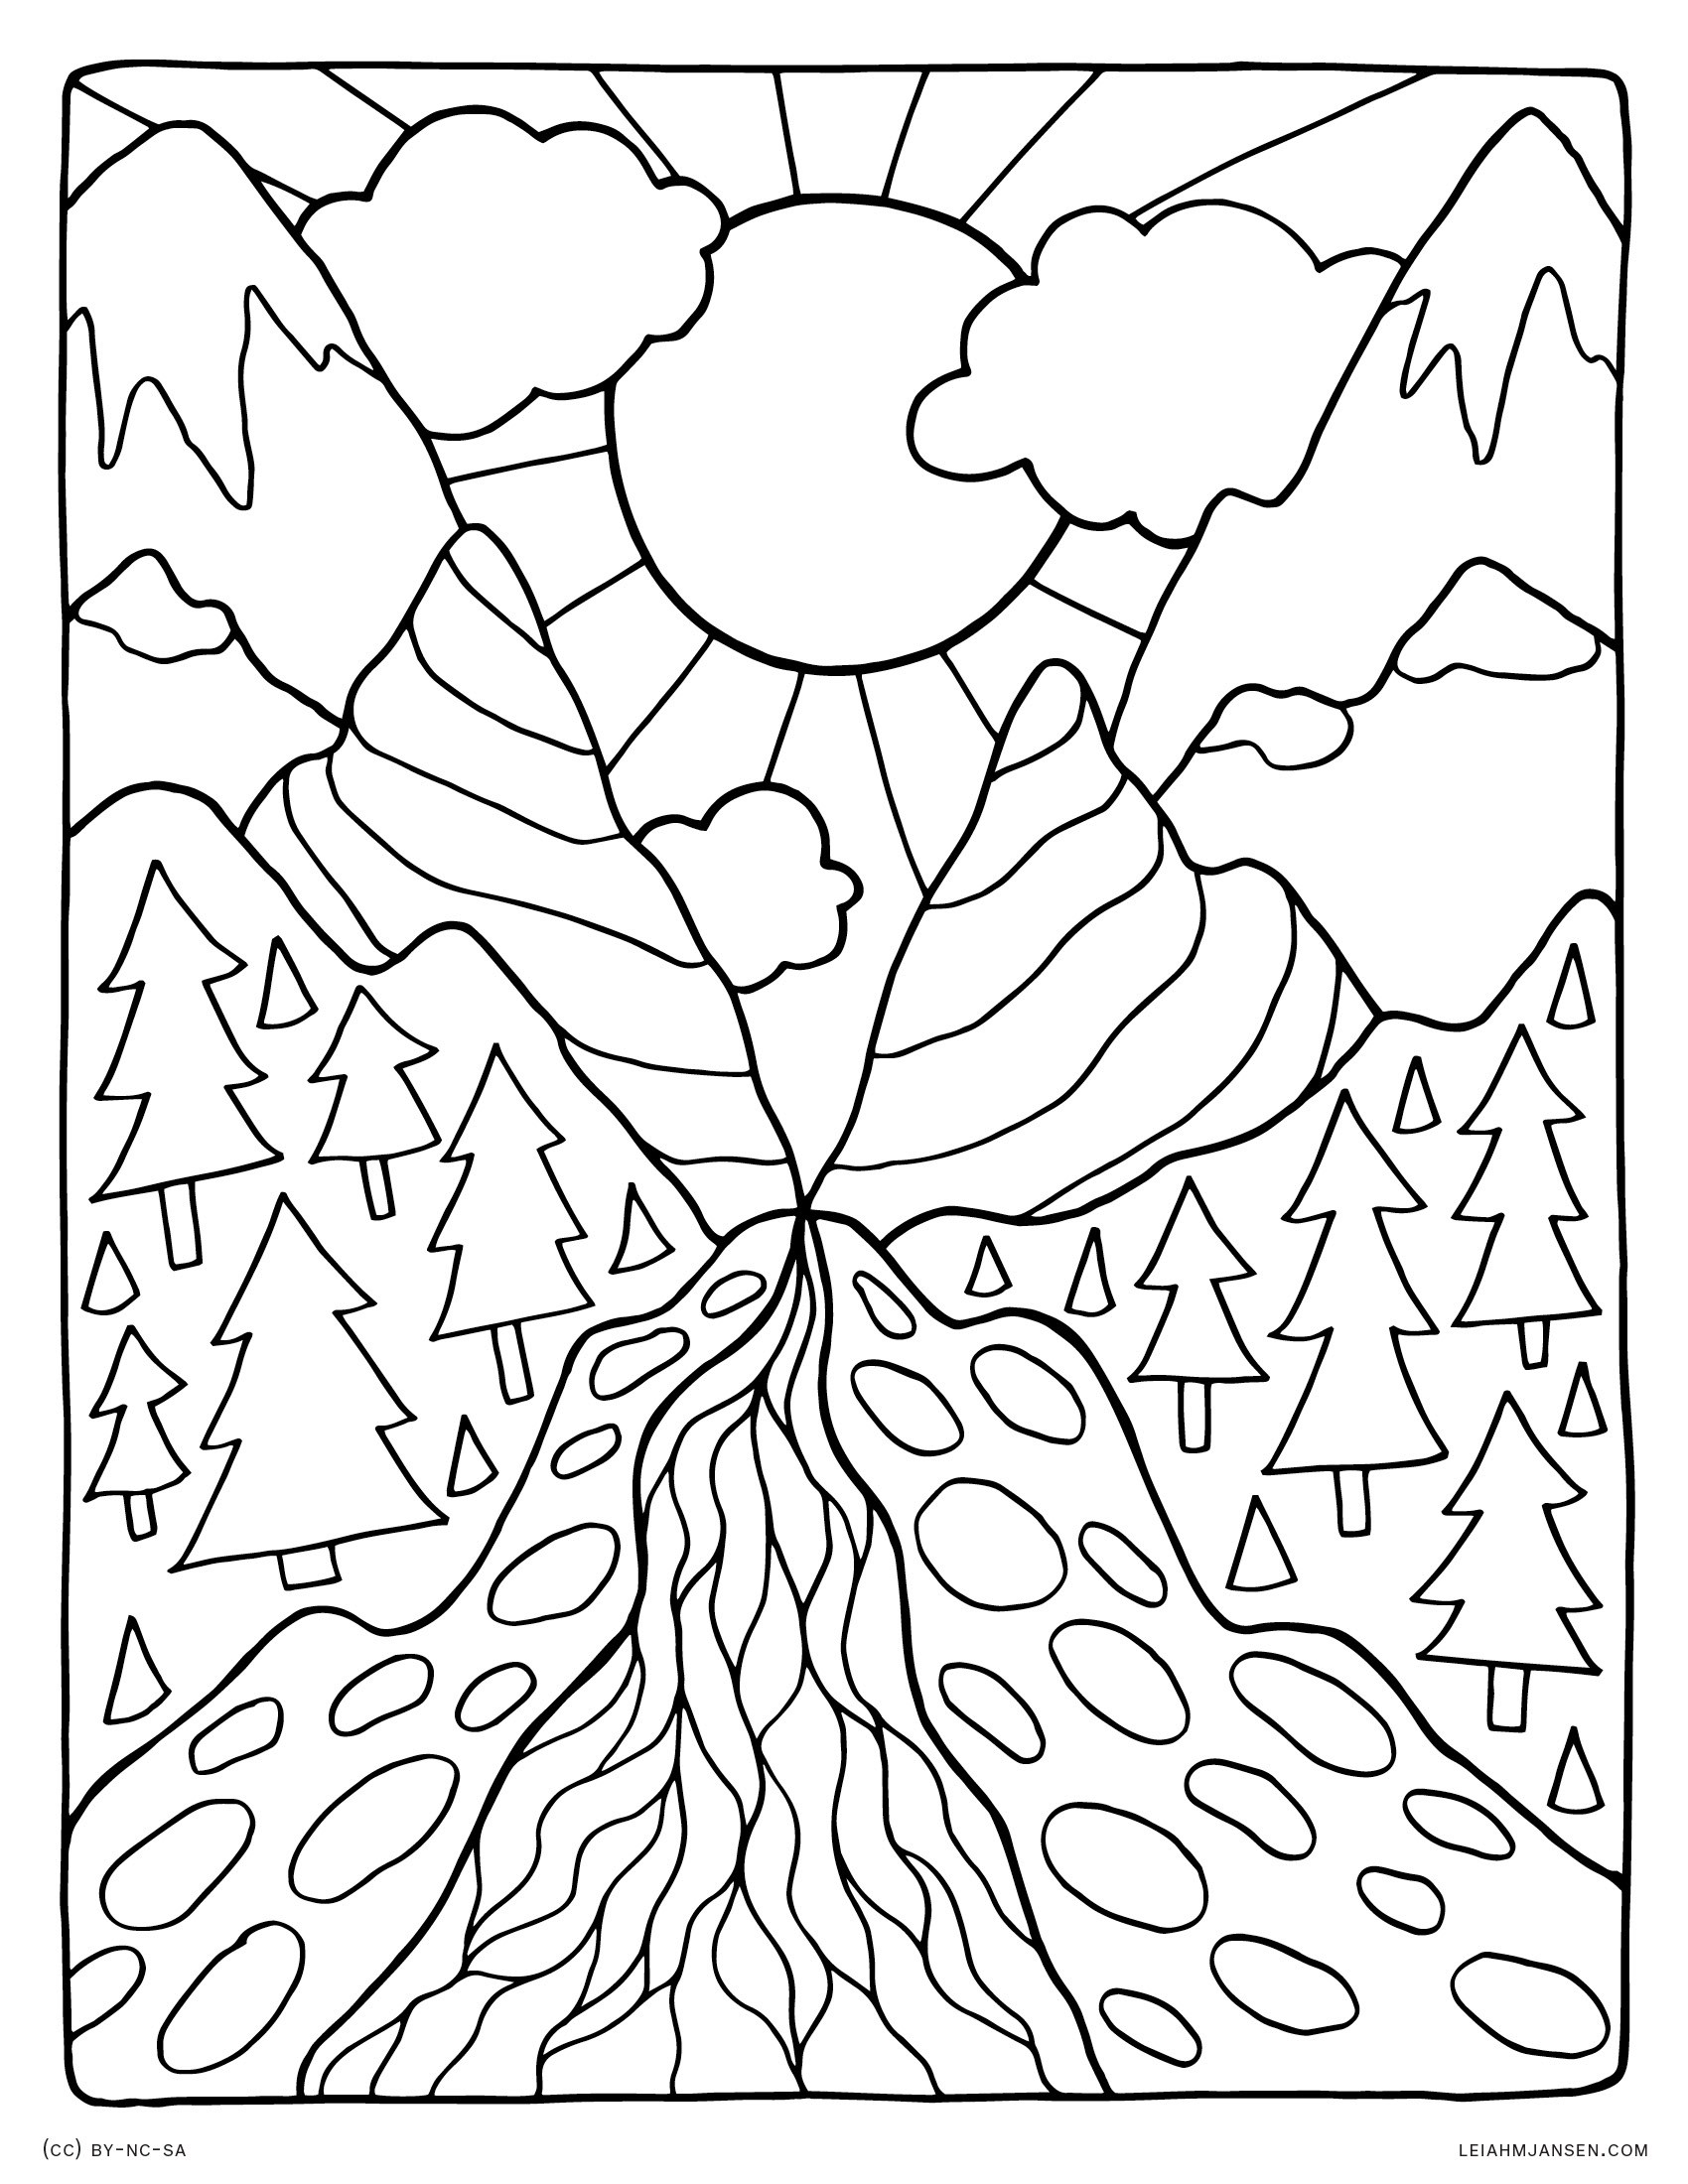 beautiful-scenery-colouring-pages-in-the-playroom